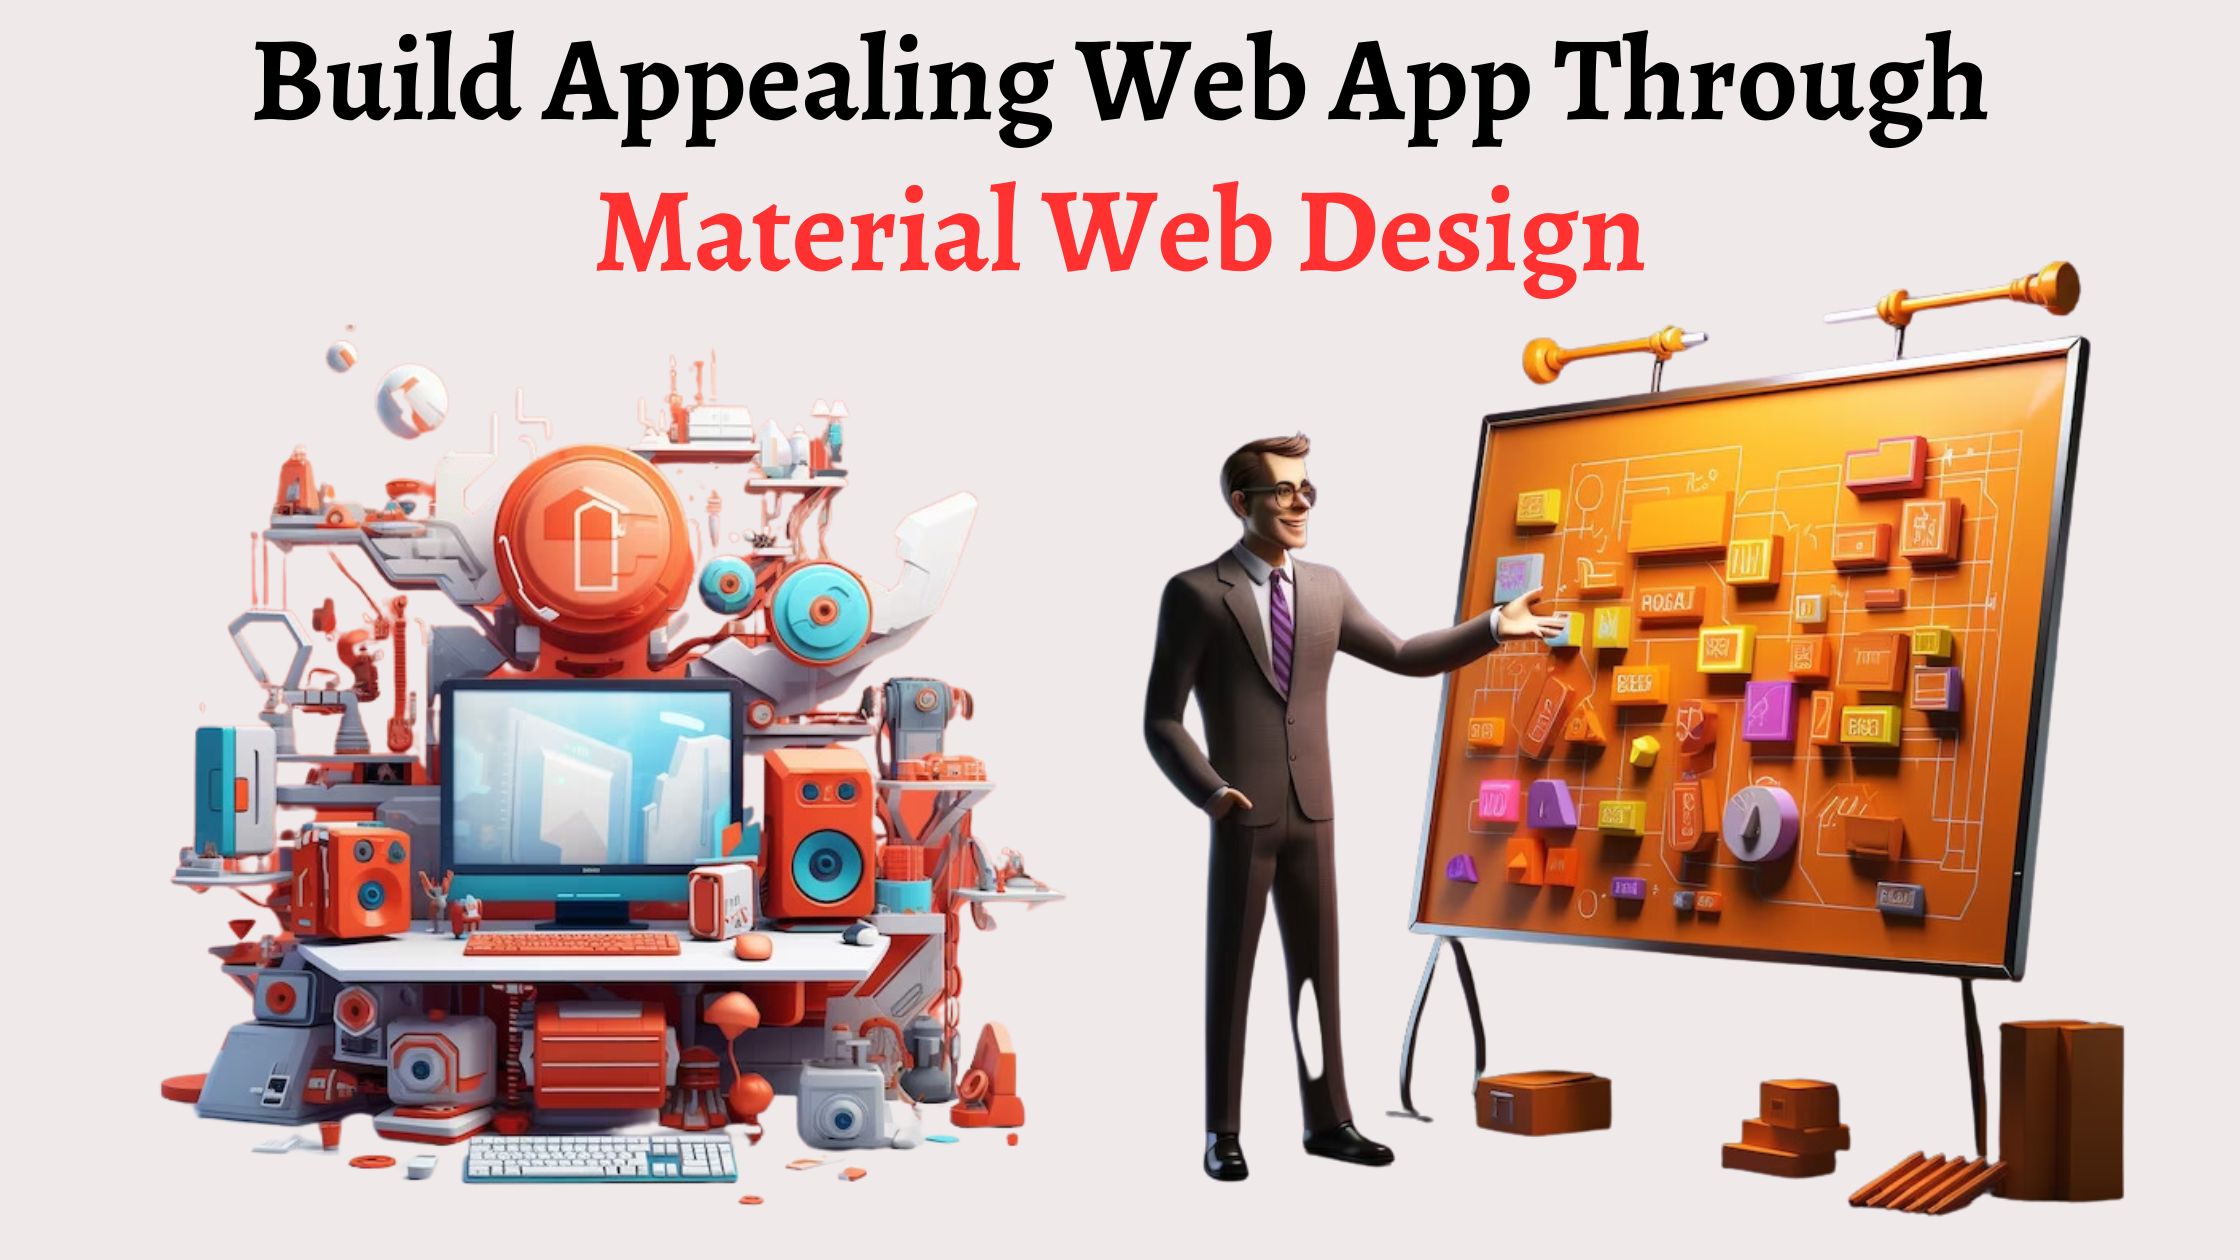 Material Web Design: Way To Give a Fantastic Look In Your Web App